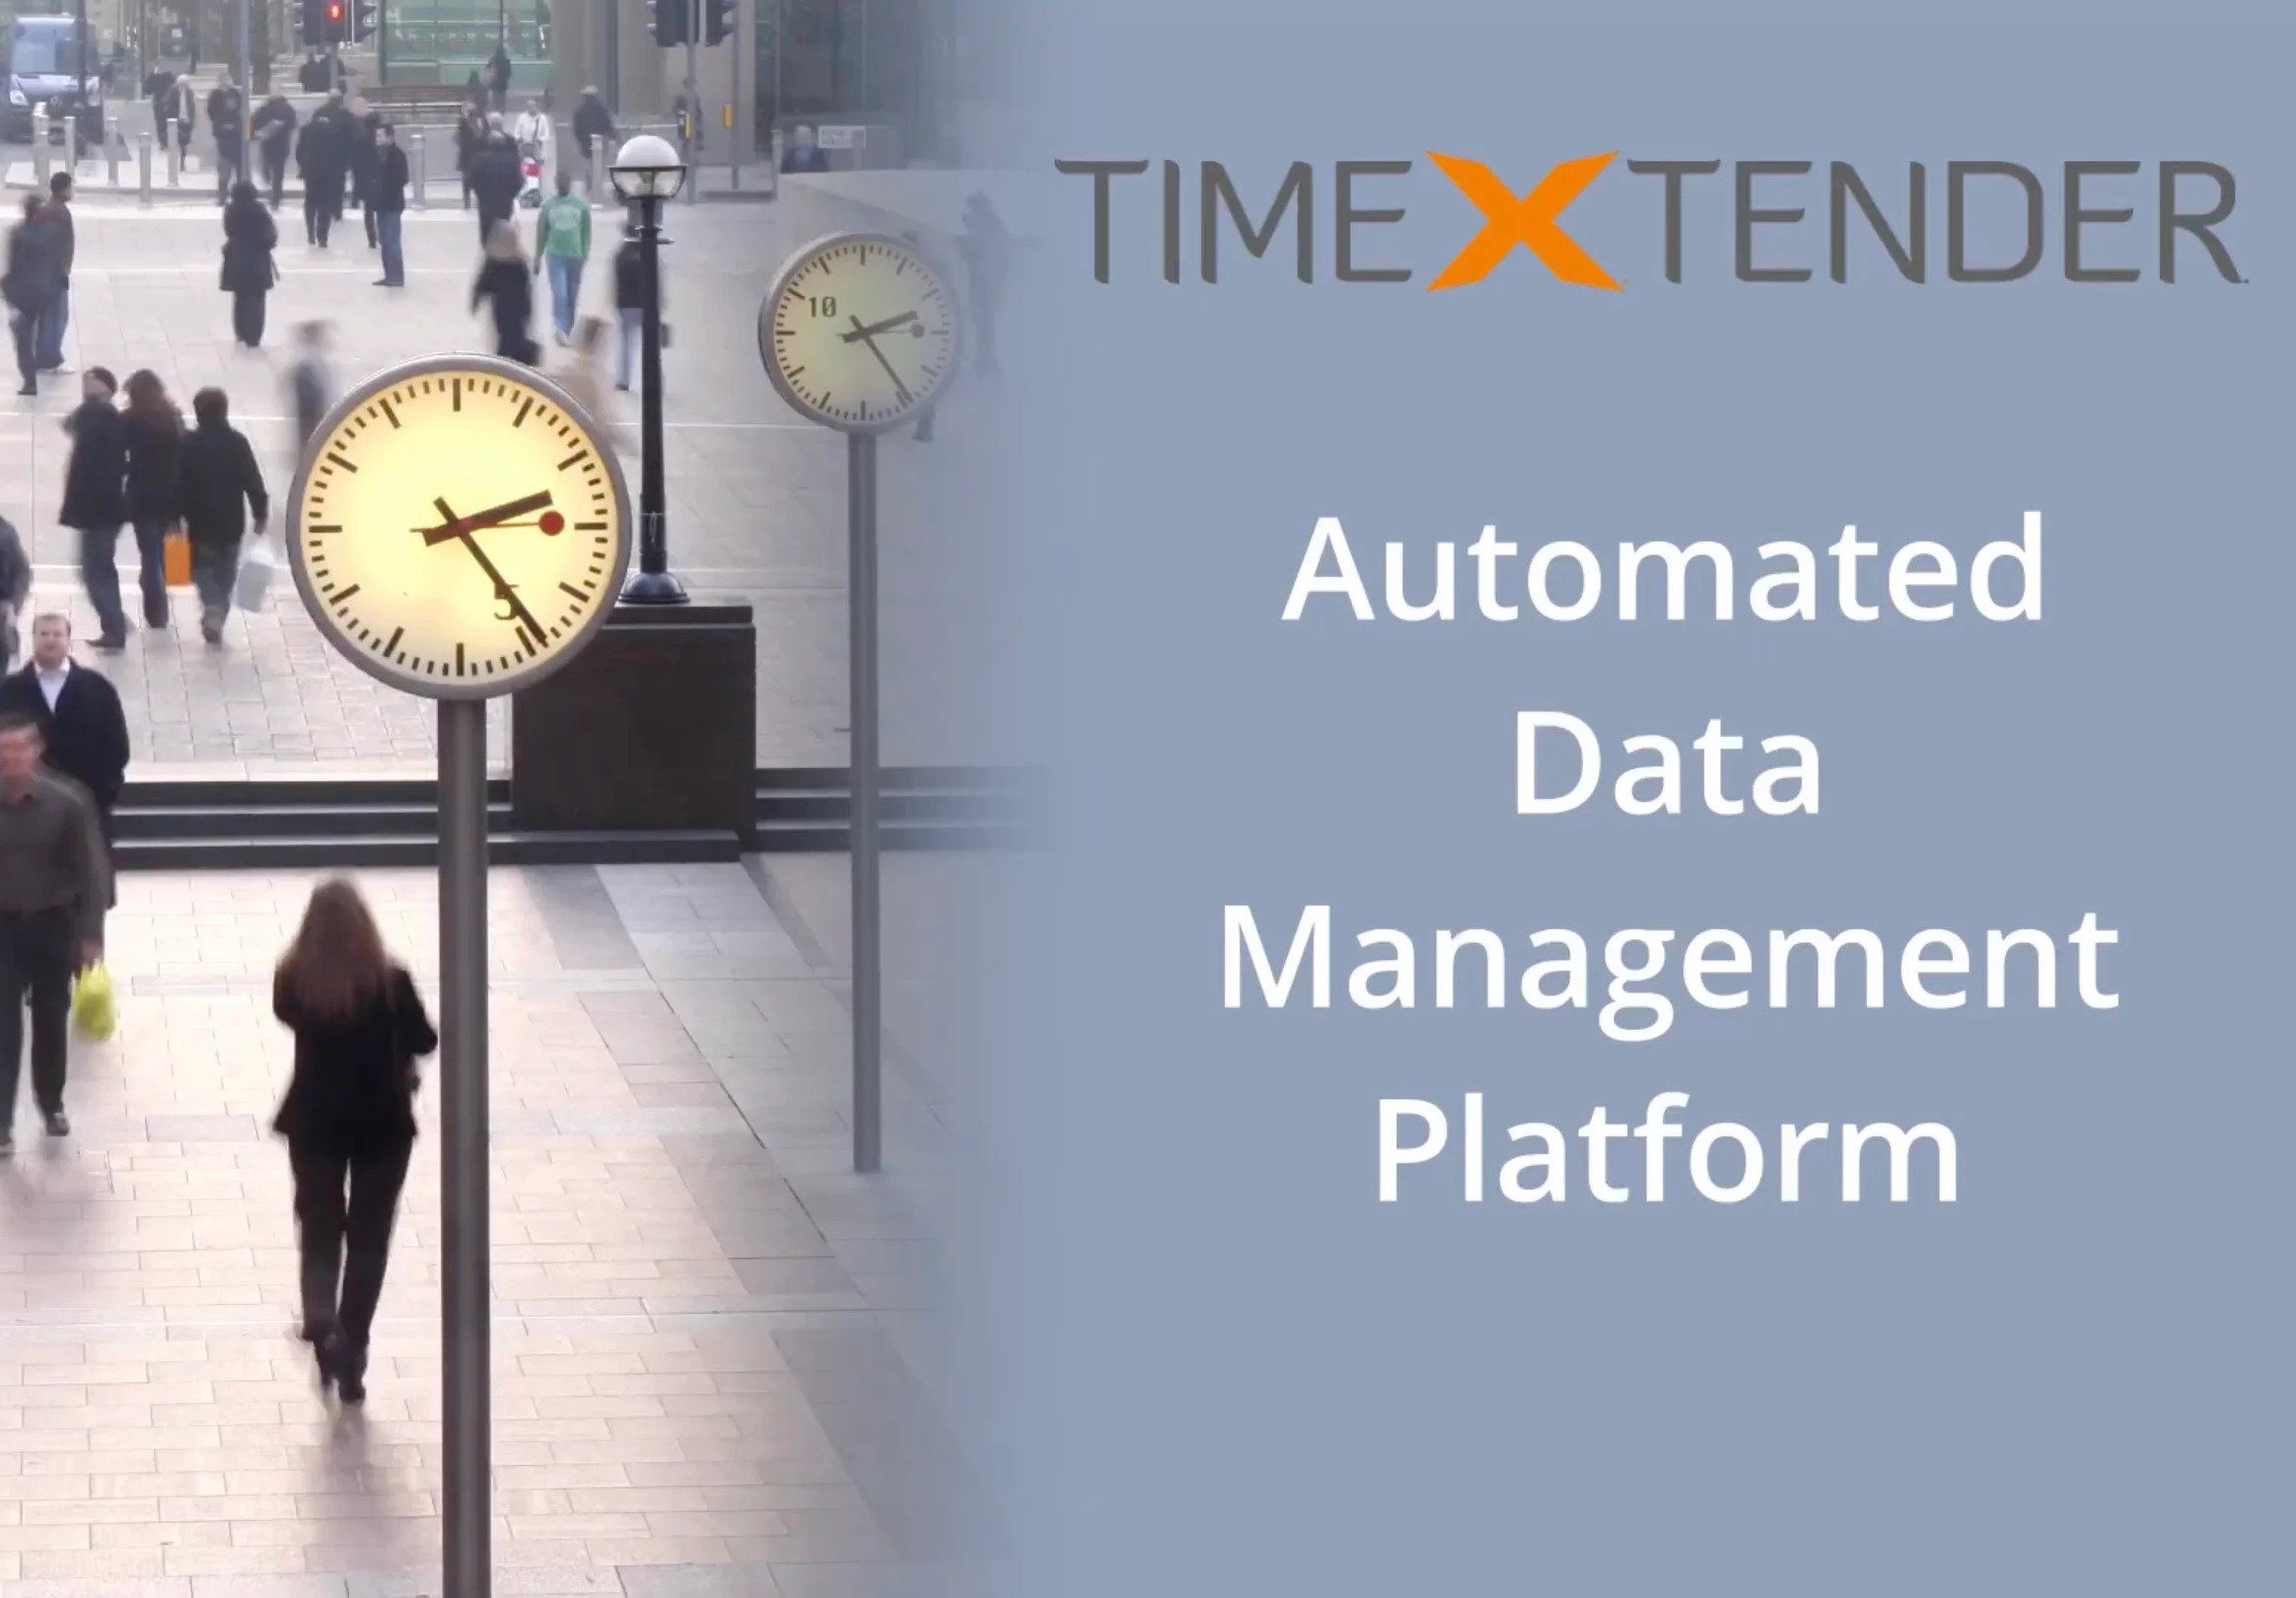 New Video Demonstrates How TimeXtender is Transforming Business